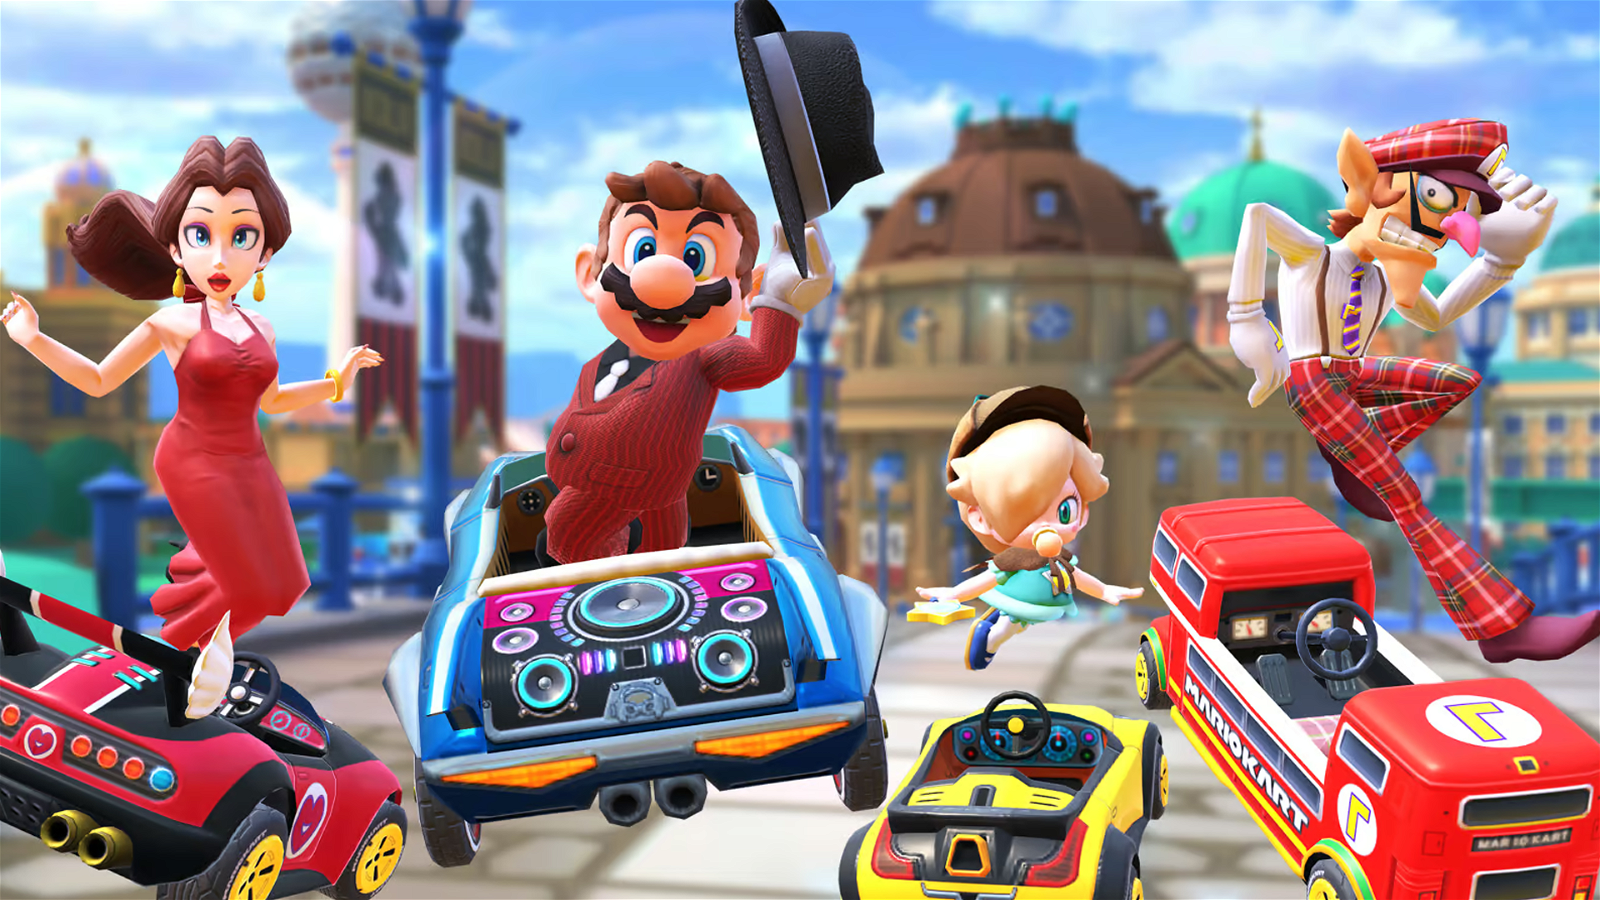 After October 4, Mario Kart Tour will receive no more new content updates.